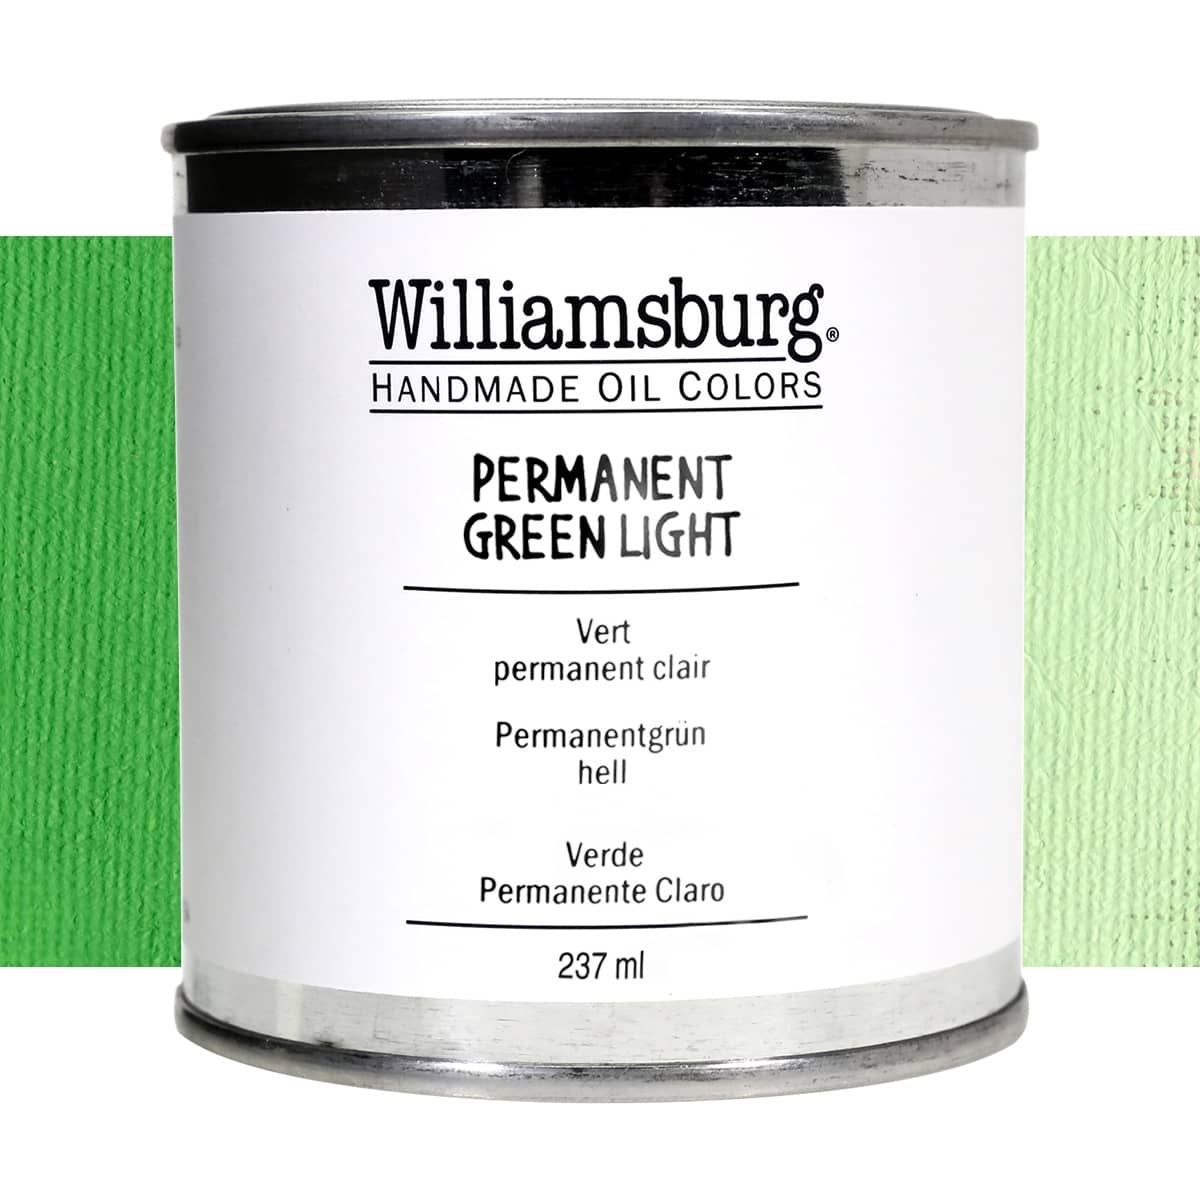 Williamsburg Oil Color 237 ml Can Permanent Green Light